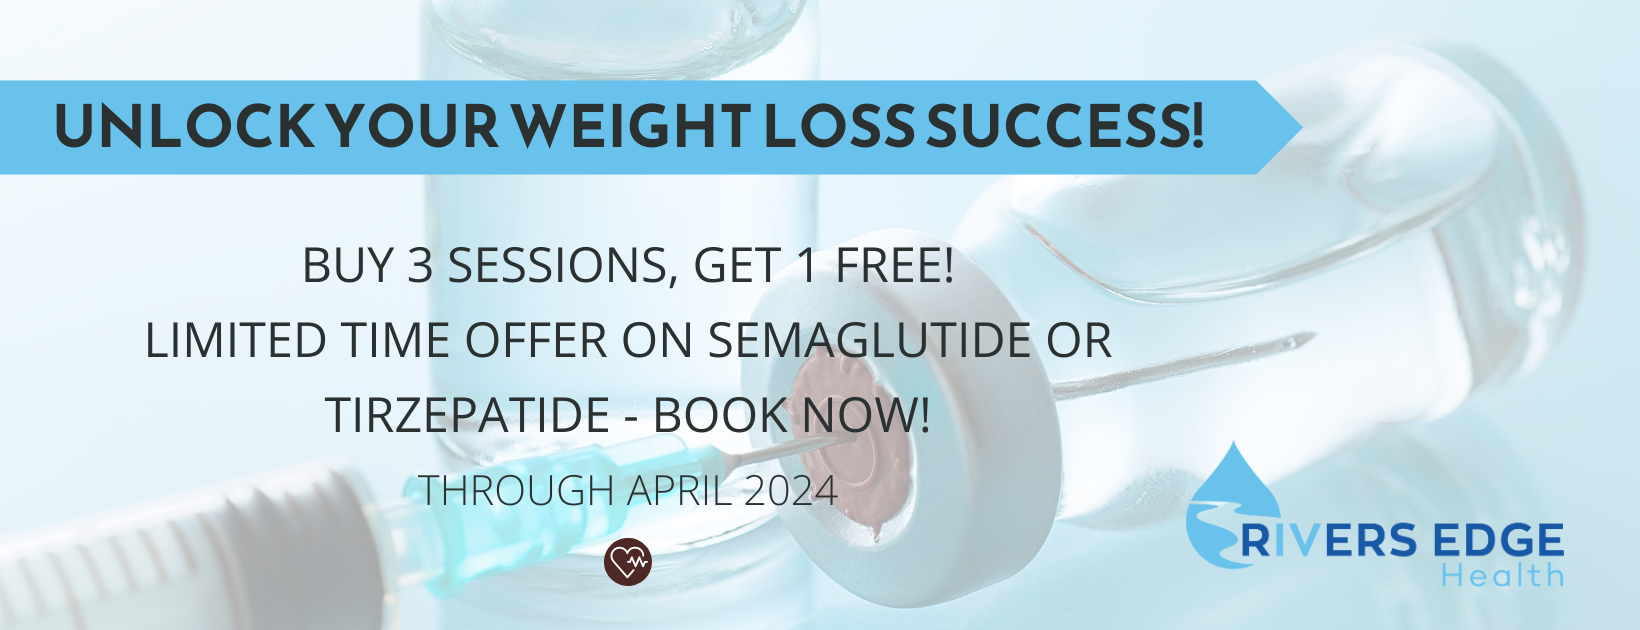 Buy 3 Sessions, Get 1 Free! Limited Time Offer on Semaglutide or Tirzepatide - Book Now at River's Edge Boutique